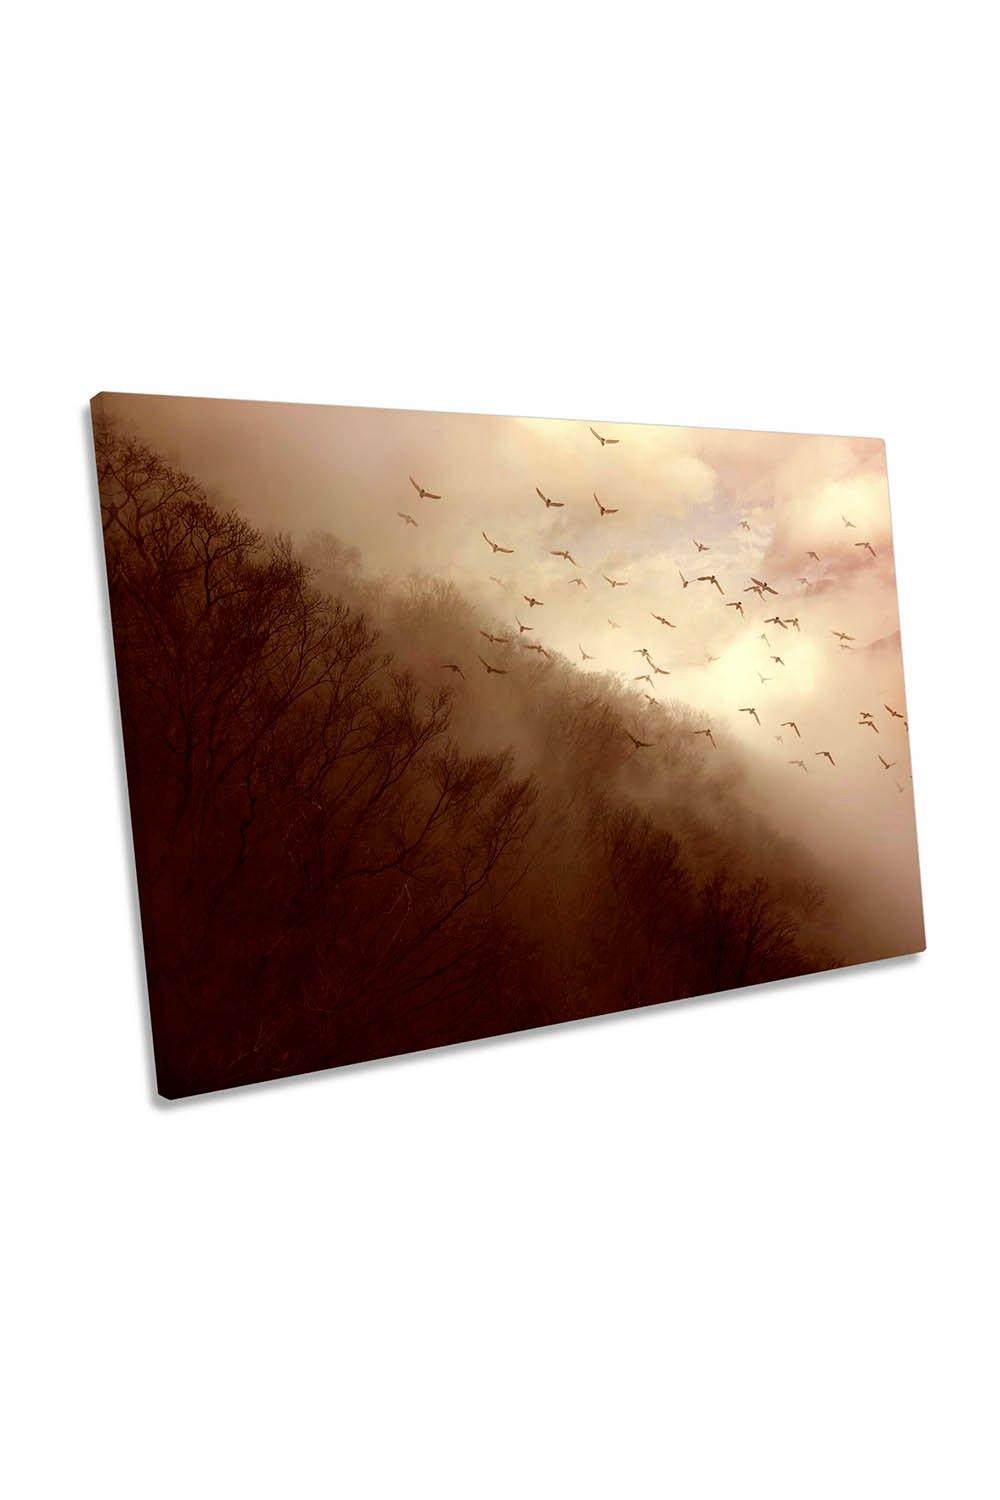 Departure Mountain Birds Canvas Wall Art Picture Print